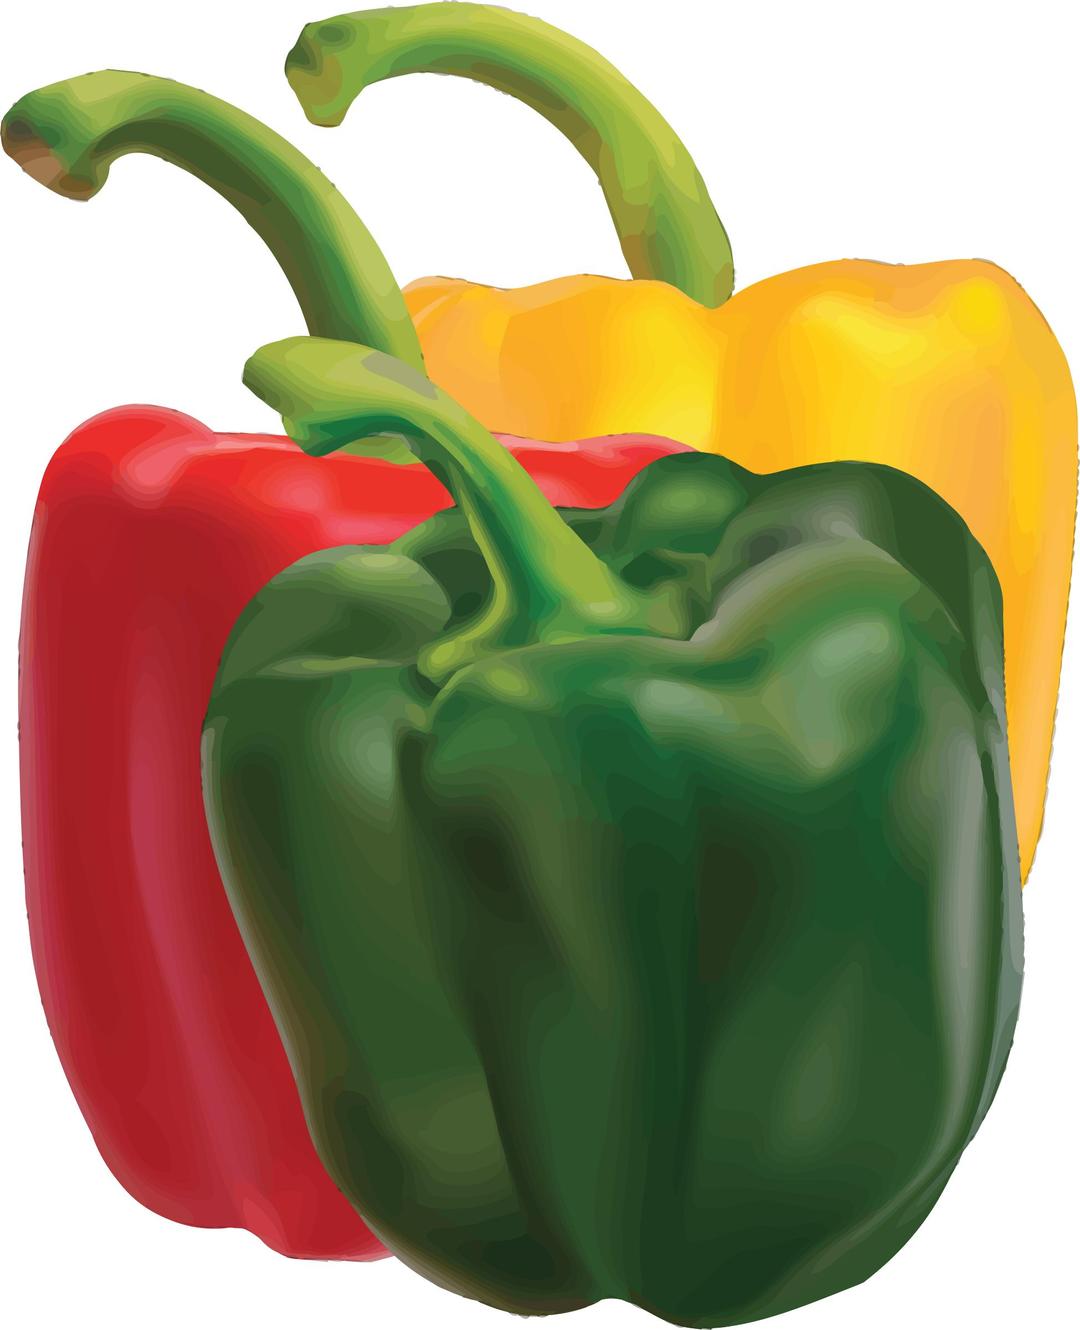 Peppers 2 png transparent